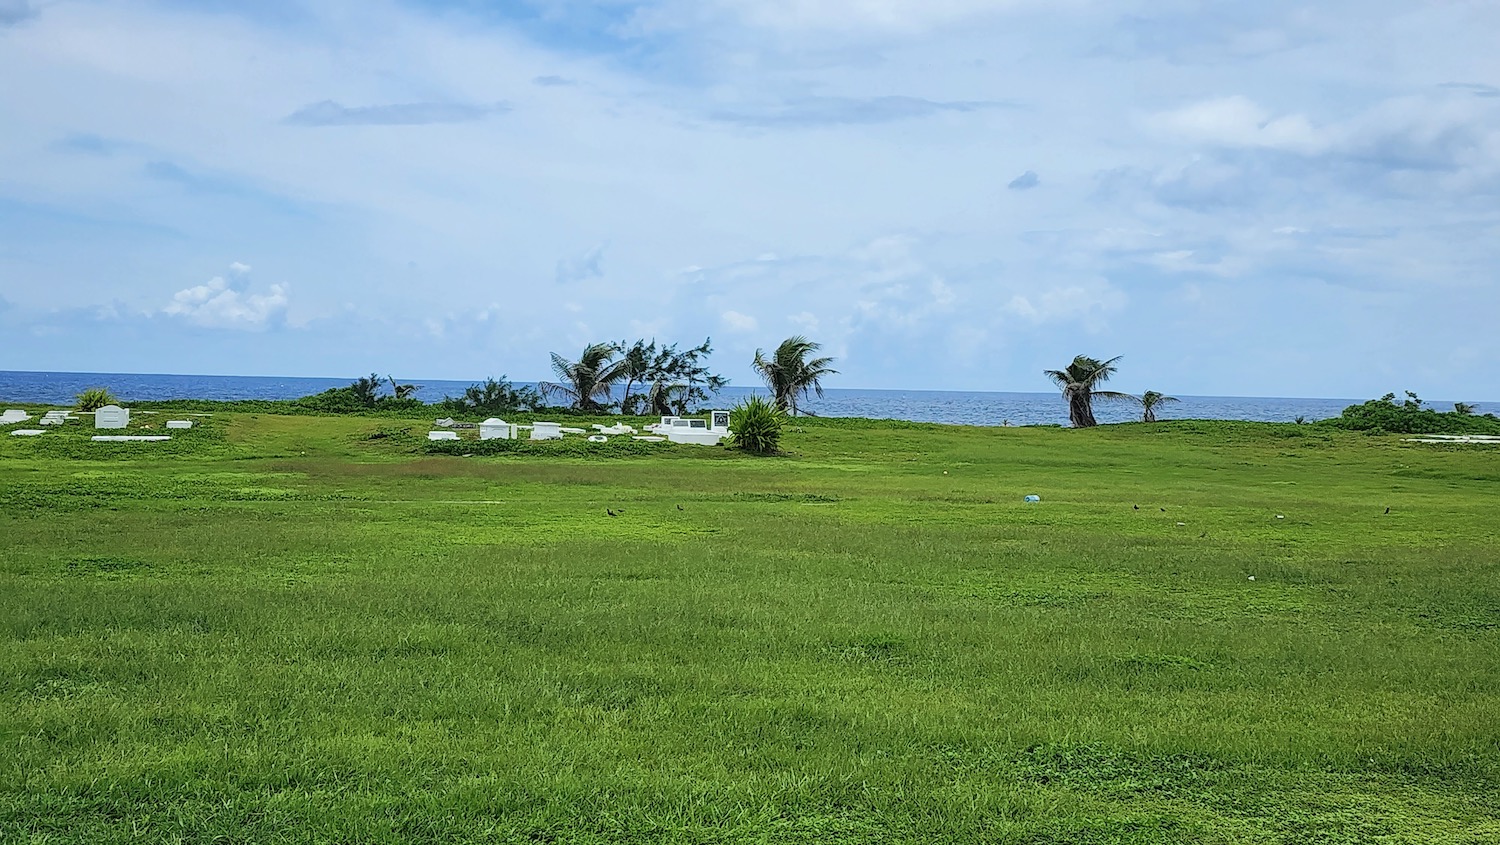 a large grassy field with palm trees and a body of water